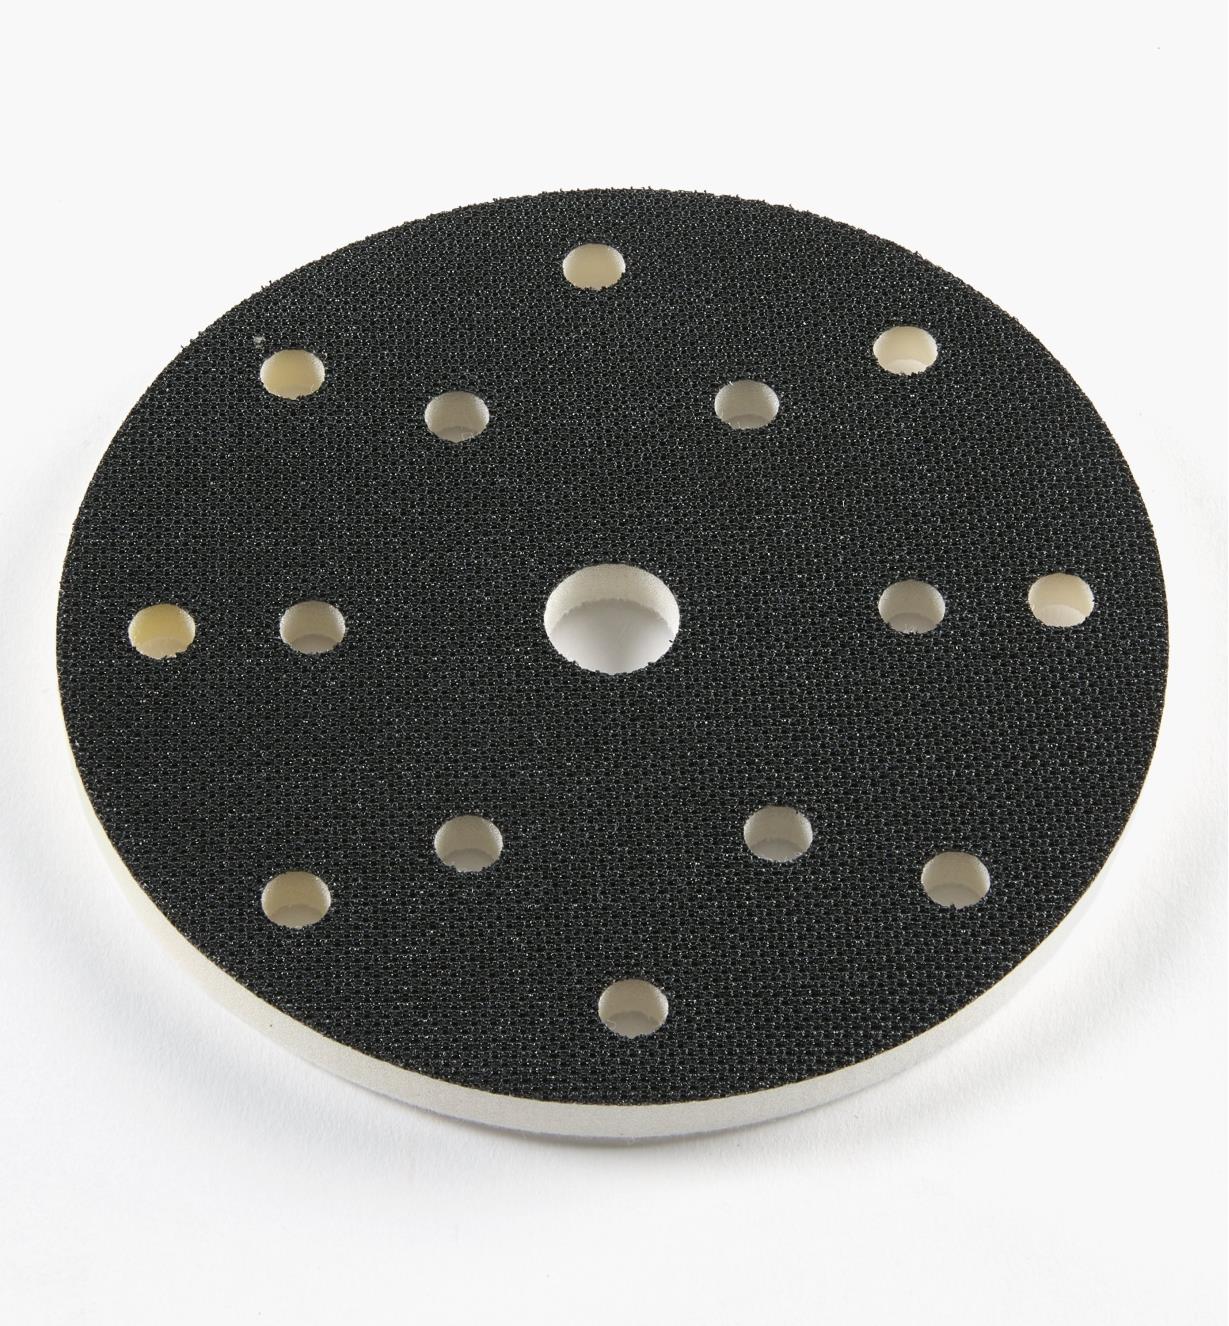 08K1921 - 6" Grip-Faced Firm Interface Pad